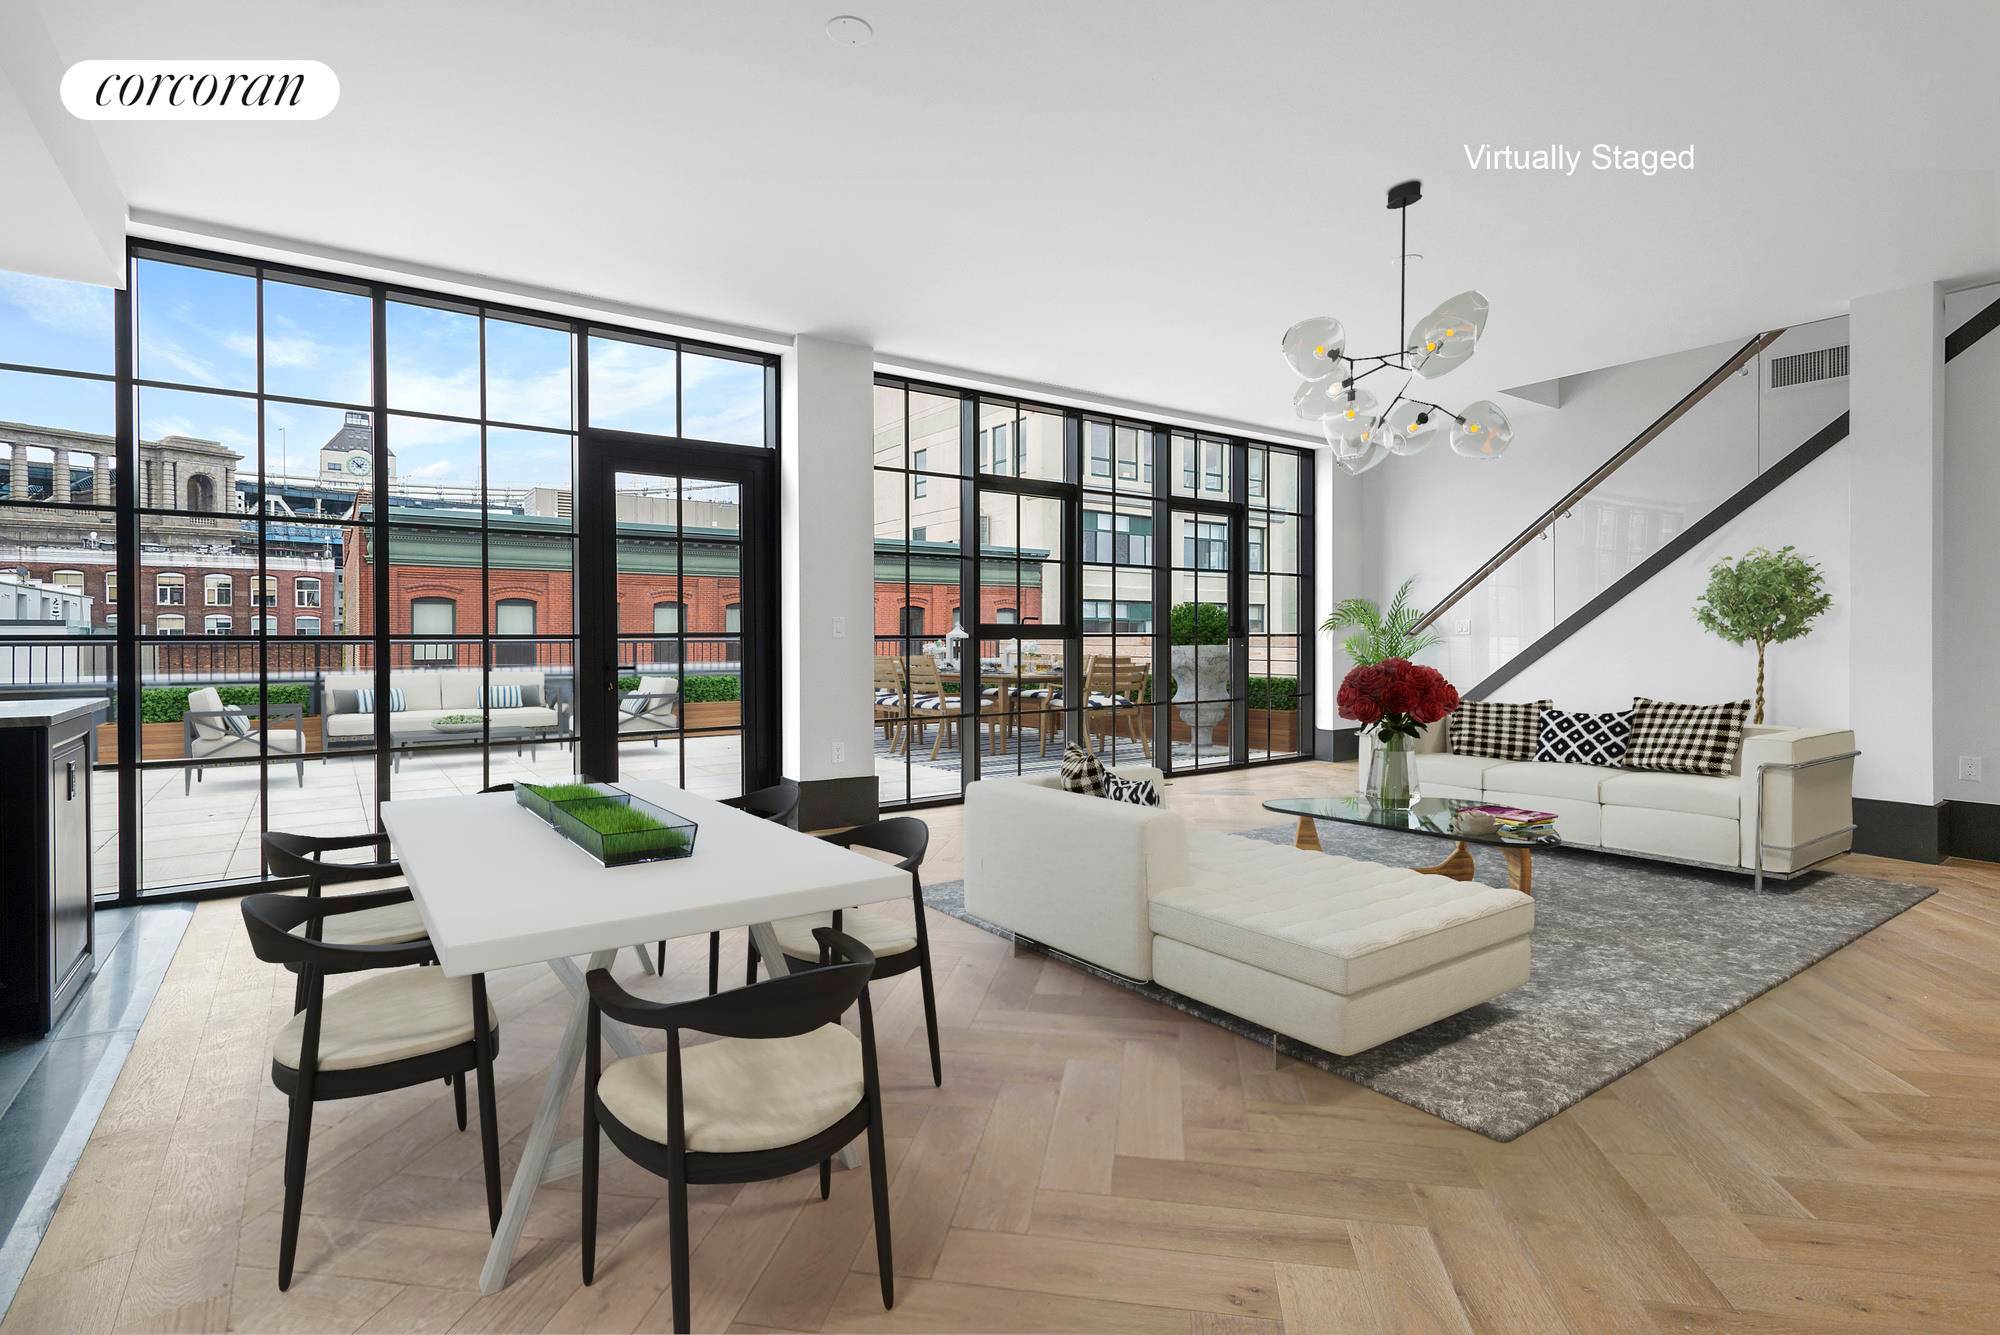 51 Jay Street Penthouse D 3 Bedroom 4 Bath Duplex Penthouse with Two Amazing Private Terraces, Storage, and One Garage Parking Space in one of Dumbo's most luxurious Full Service ...